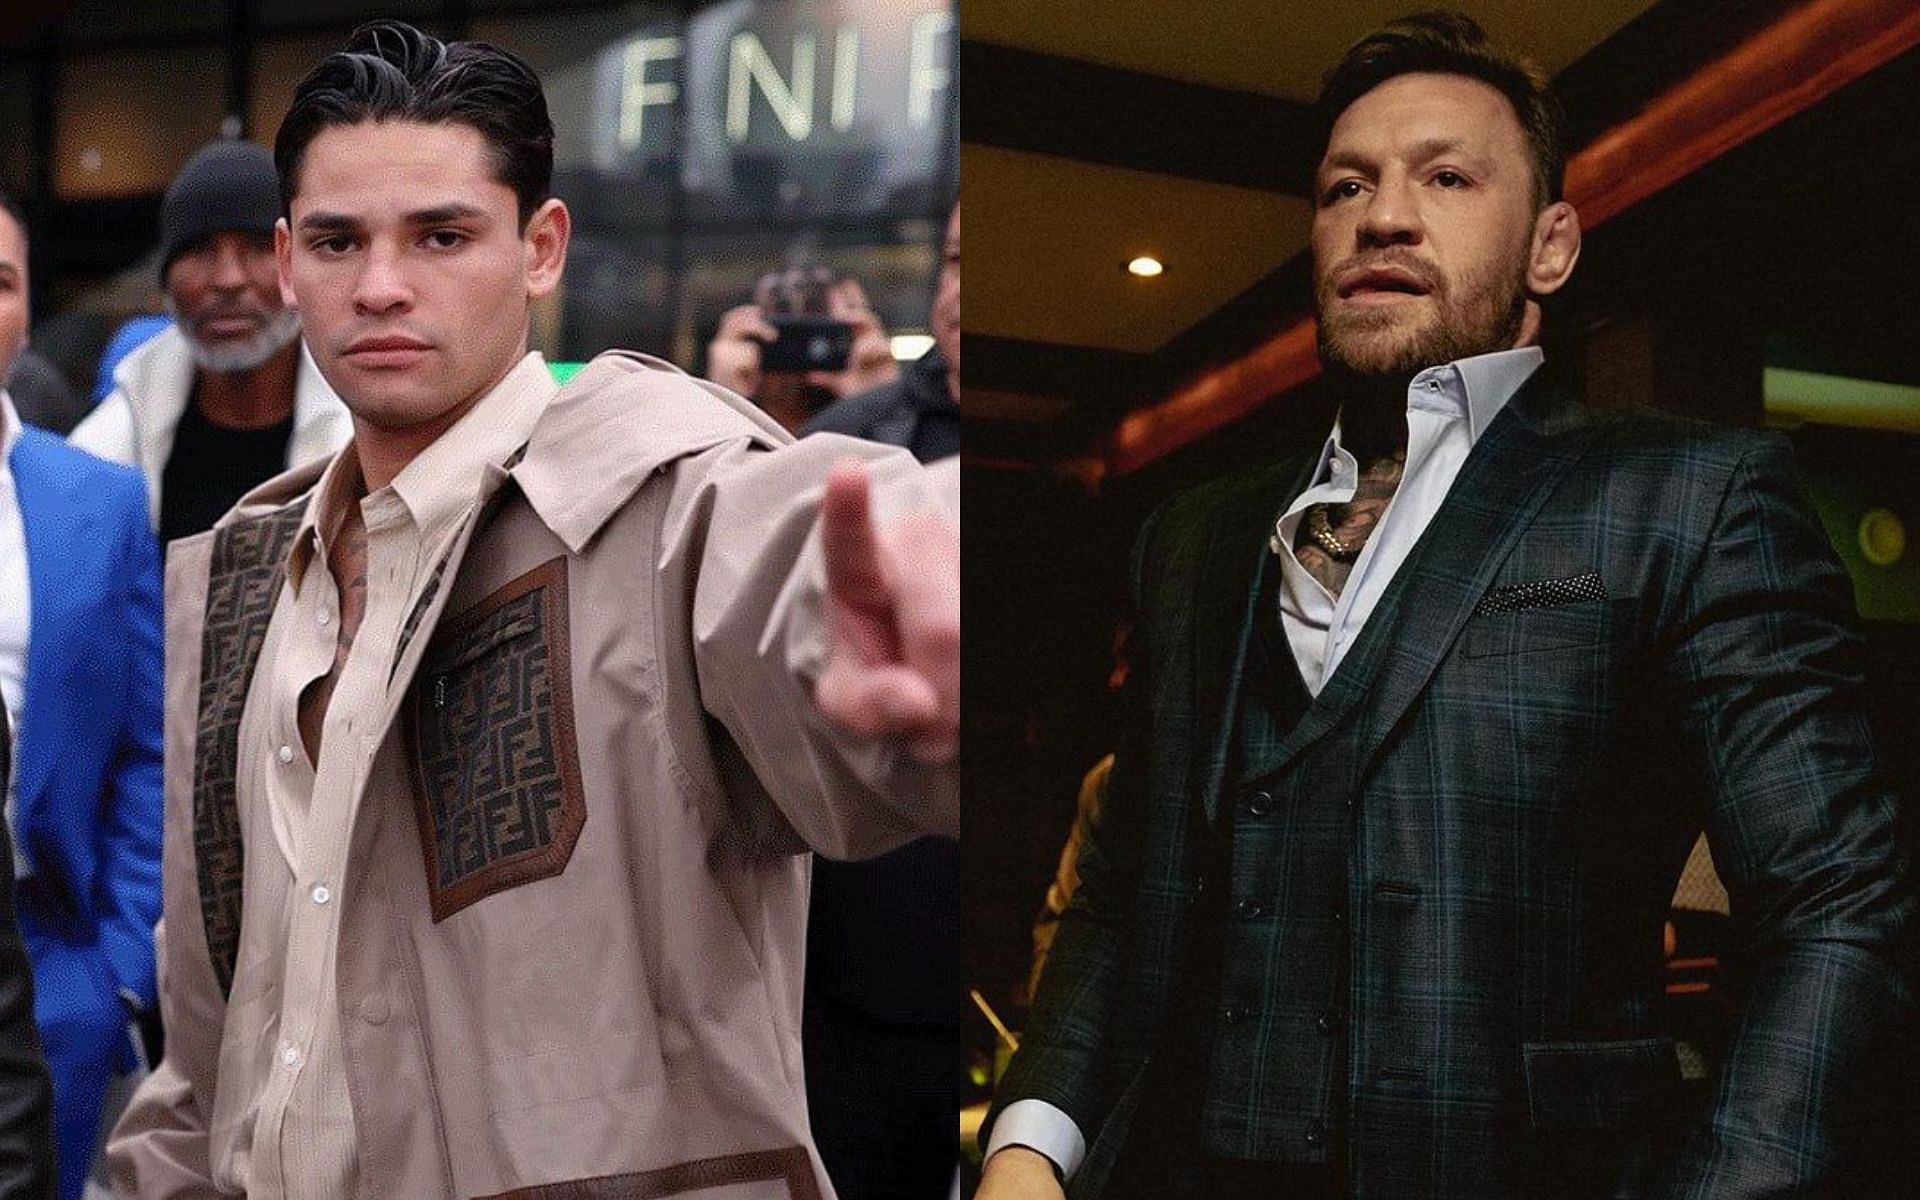 Ryan Garcia (left) gets words of encouragement from Conor McGregor (right) [Image courtesy @goldenboy @thenotoriousmma on Instagram]